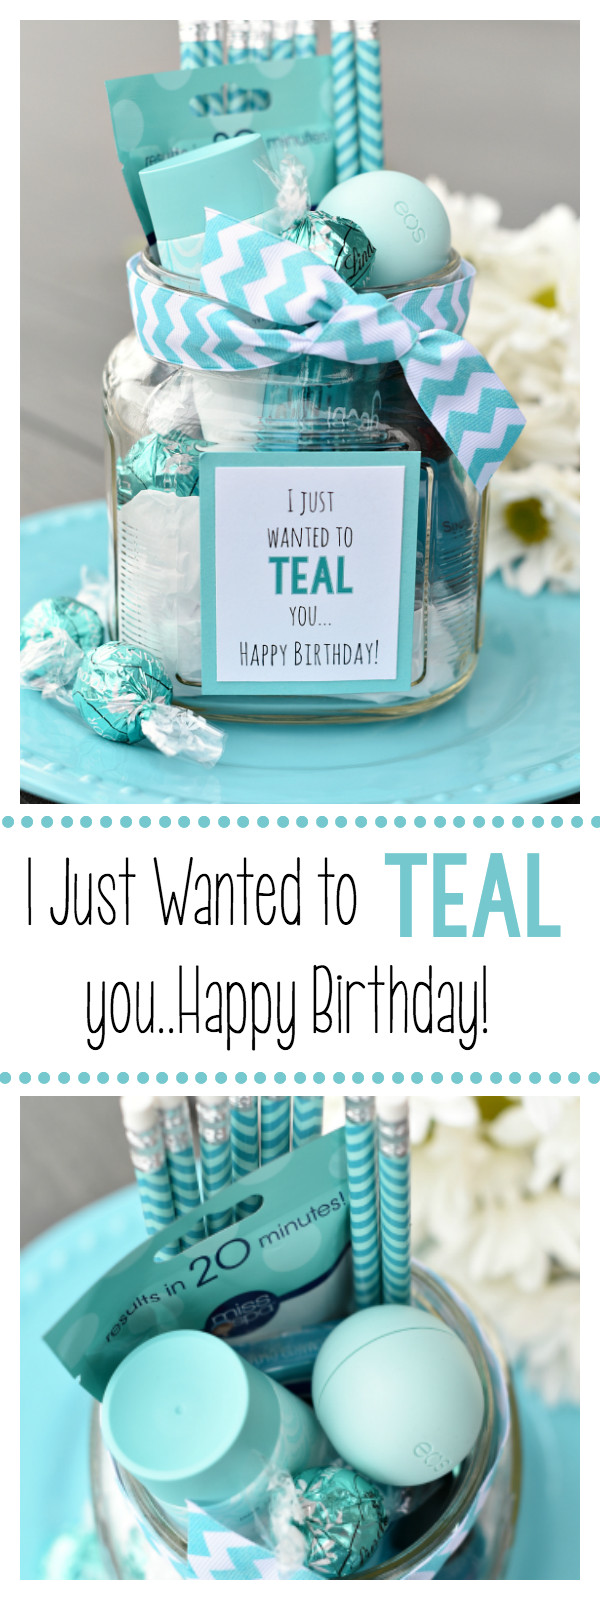 Ideas For Birthday Gifts
 Teal Birthday Gift Idea for Friends – Fun Squared